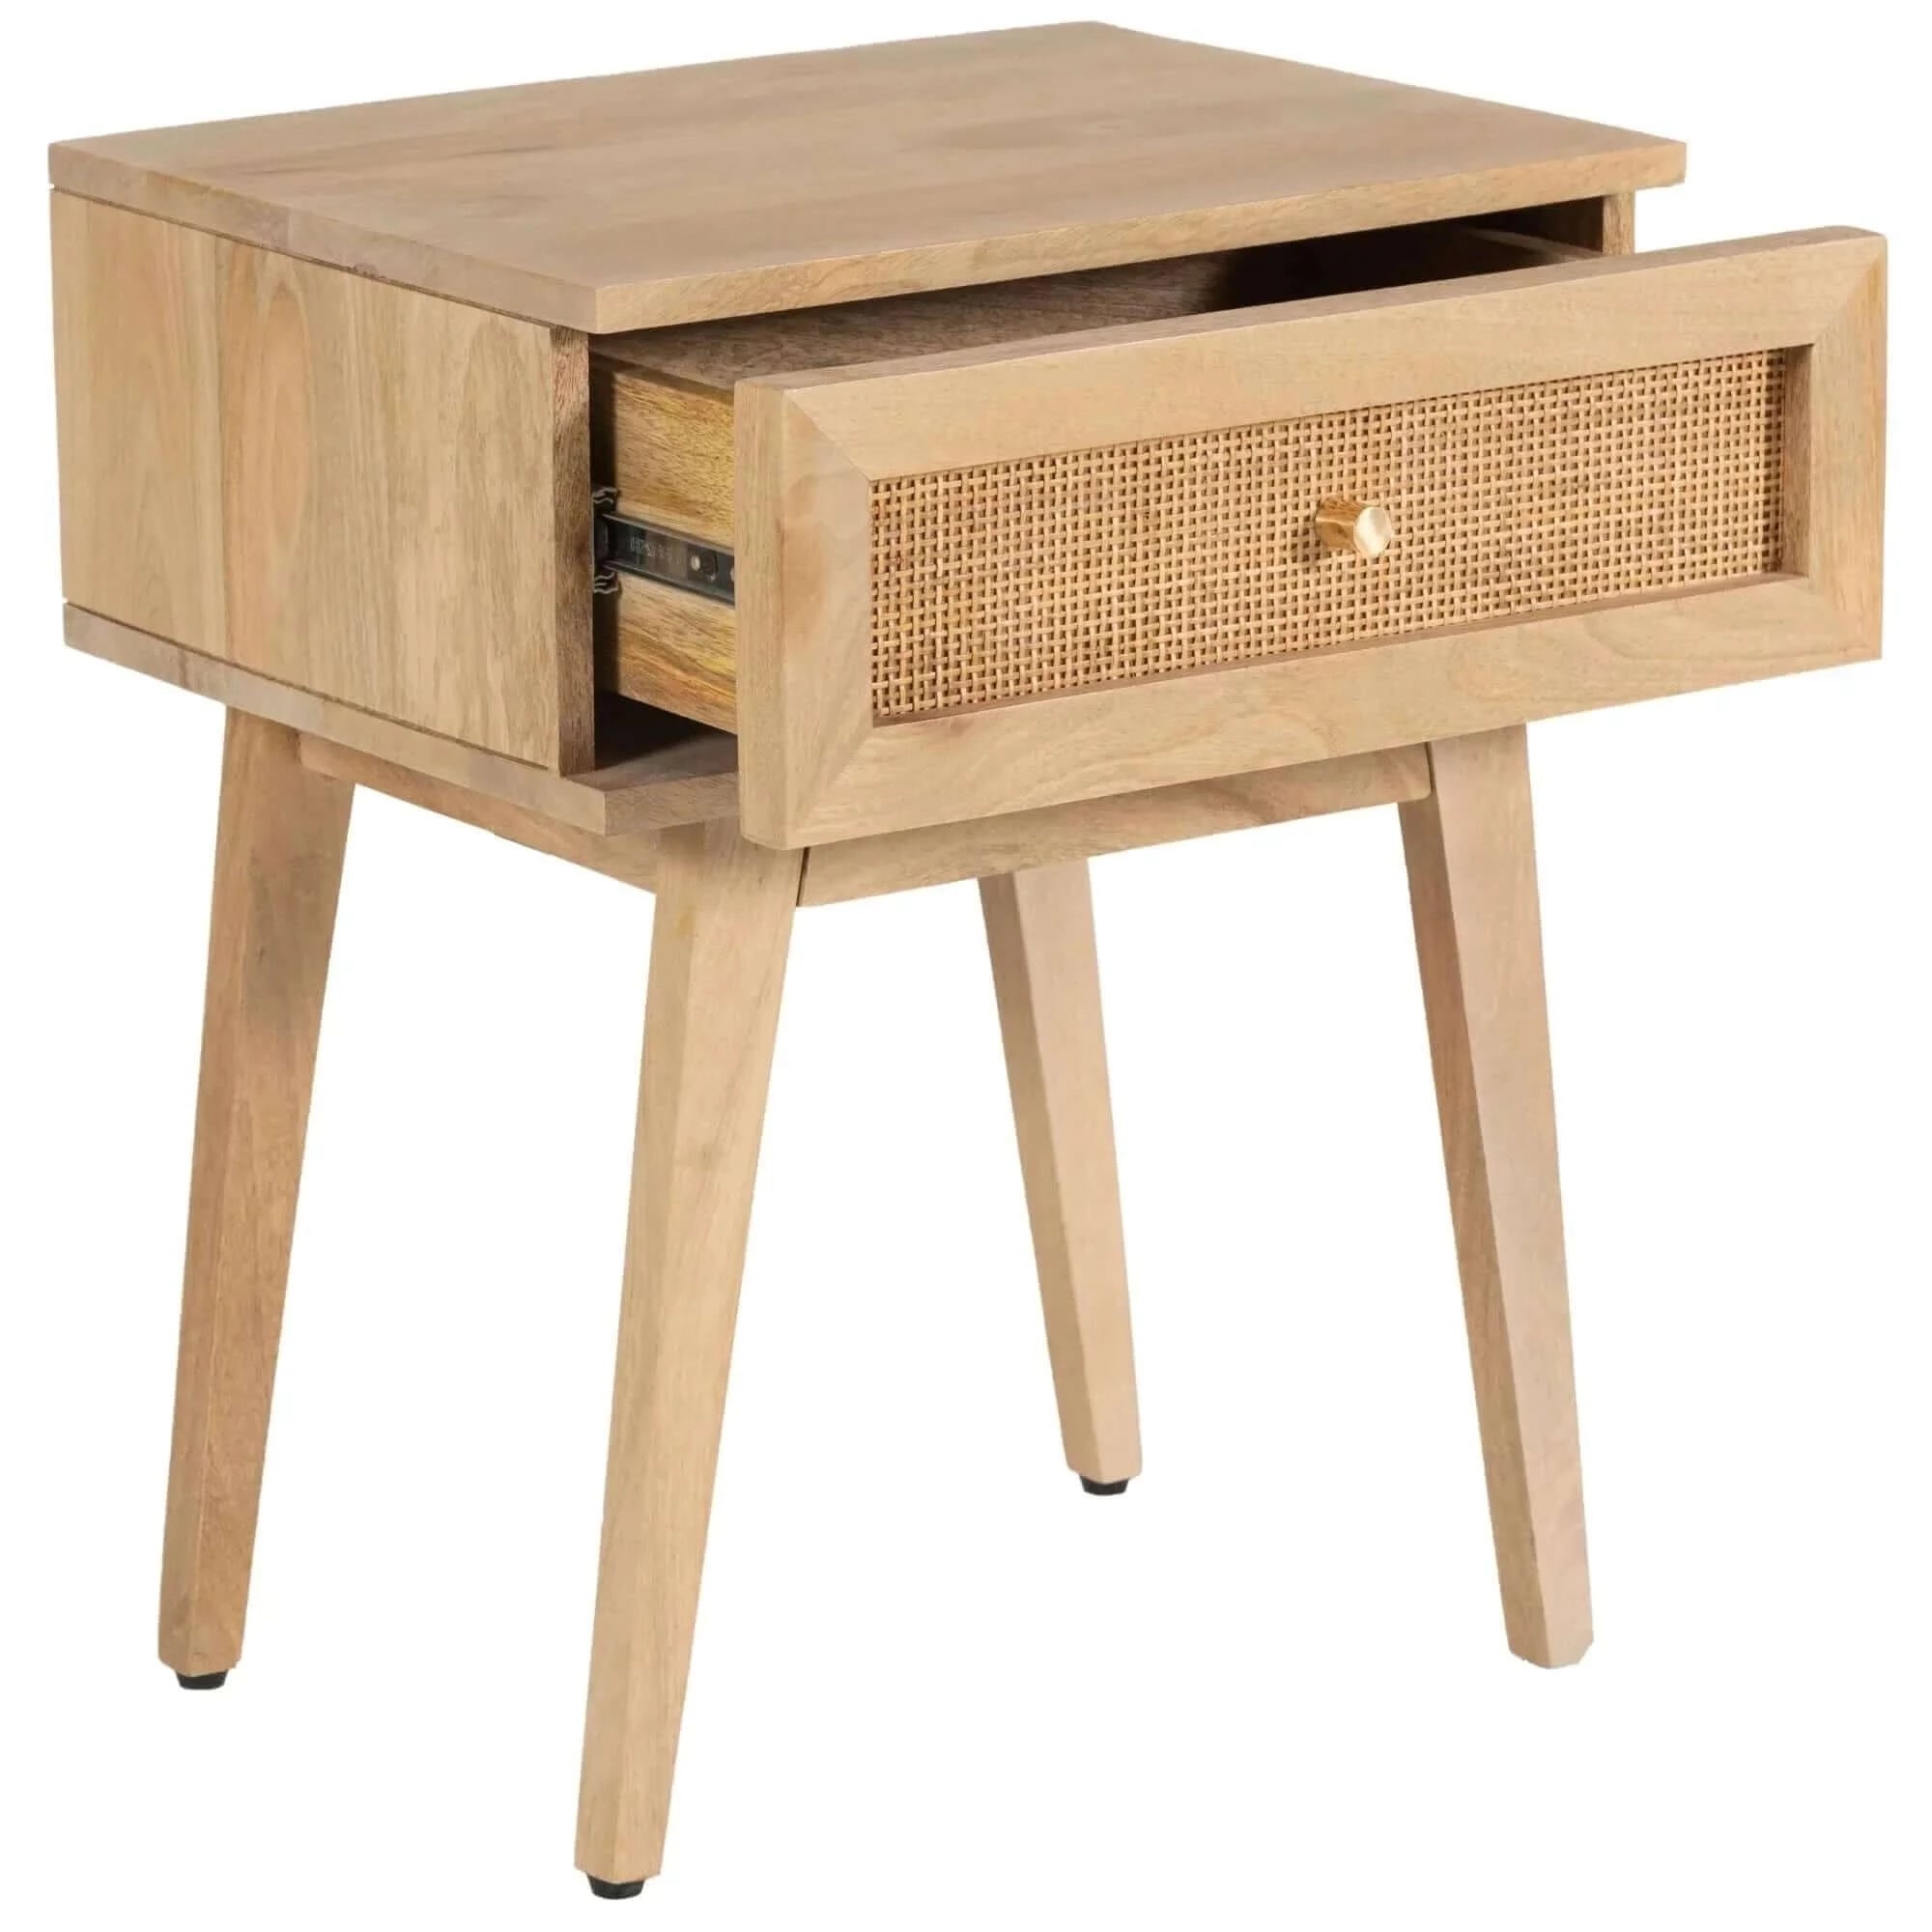 Buy olearia bedside table 1 drawer storage cabinet solid mango wood rattan natural - upinteriors-Upinteriors